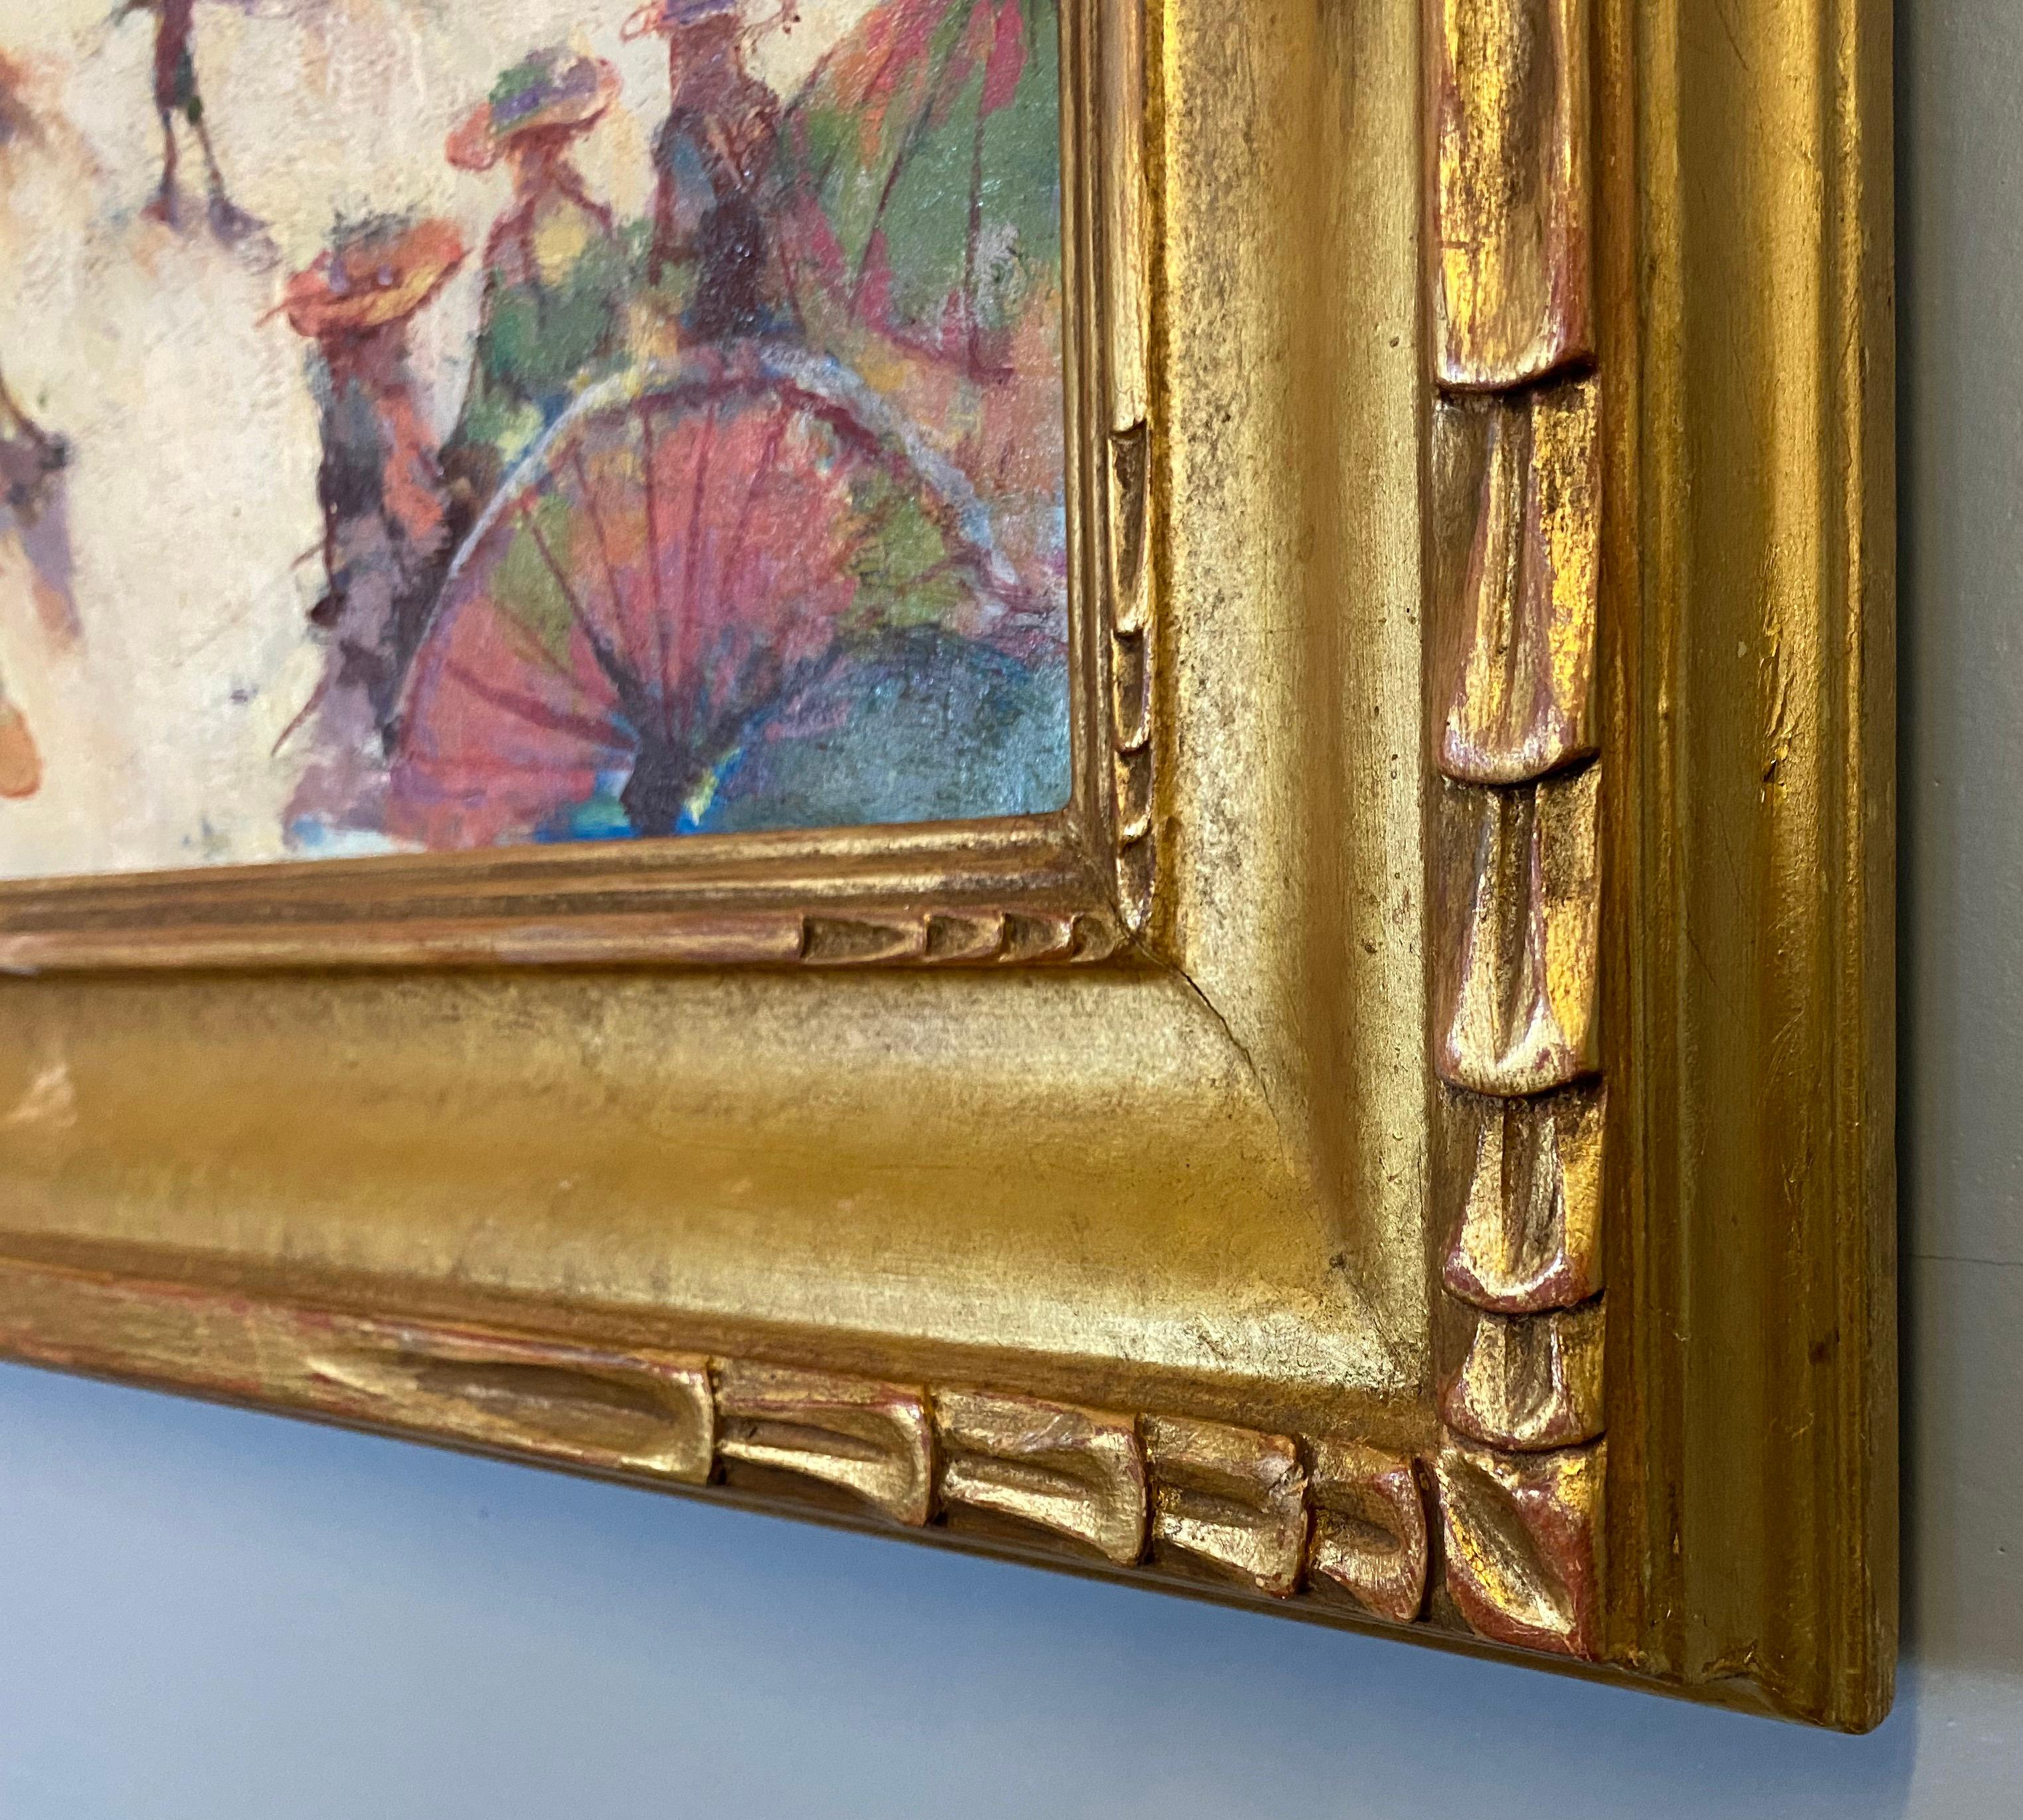 This marvelous, colorful and light filled work is a desirable work by the painter.  It is in an impressionist style carved and leafed frame.  Illustrated in the book by the artist 